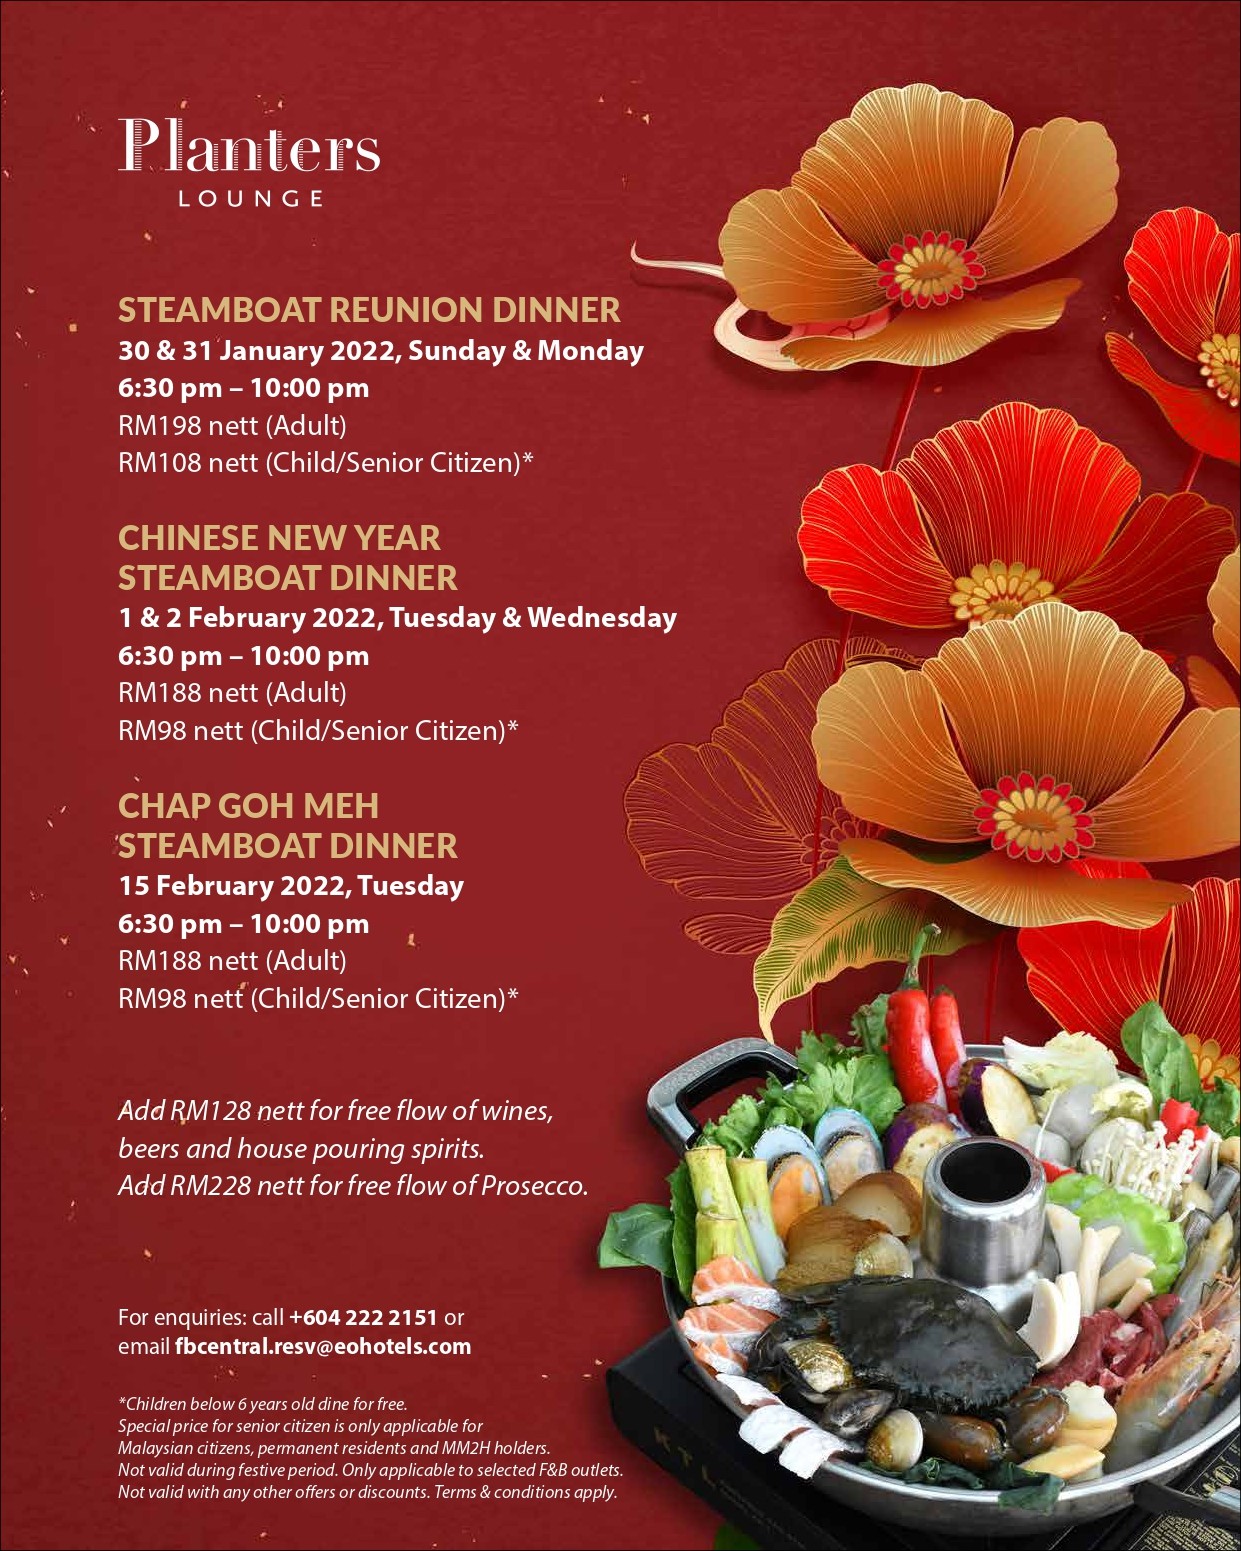 Planter's Lounge CNY by Eastern & Oriental Hotel